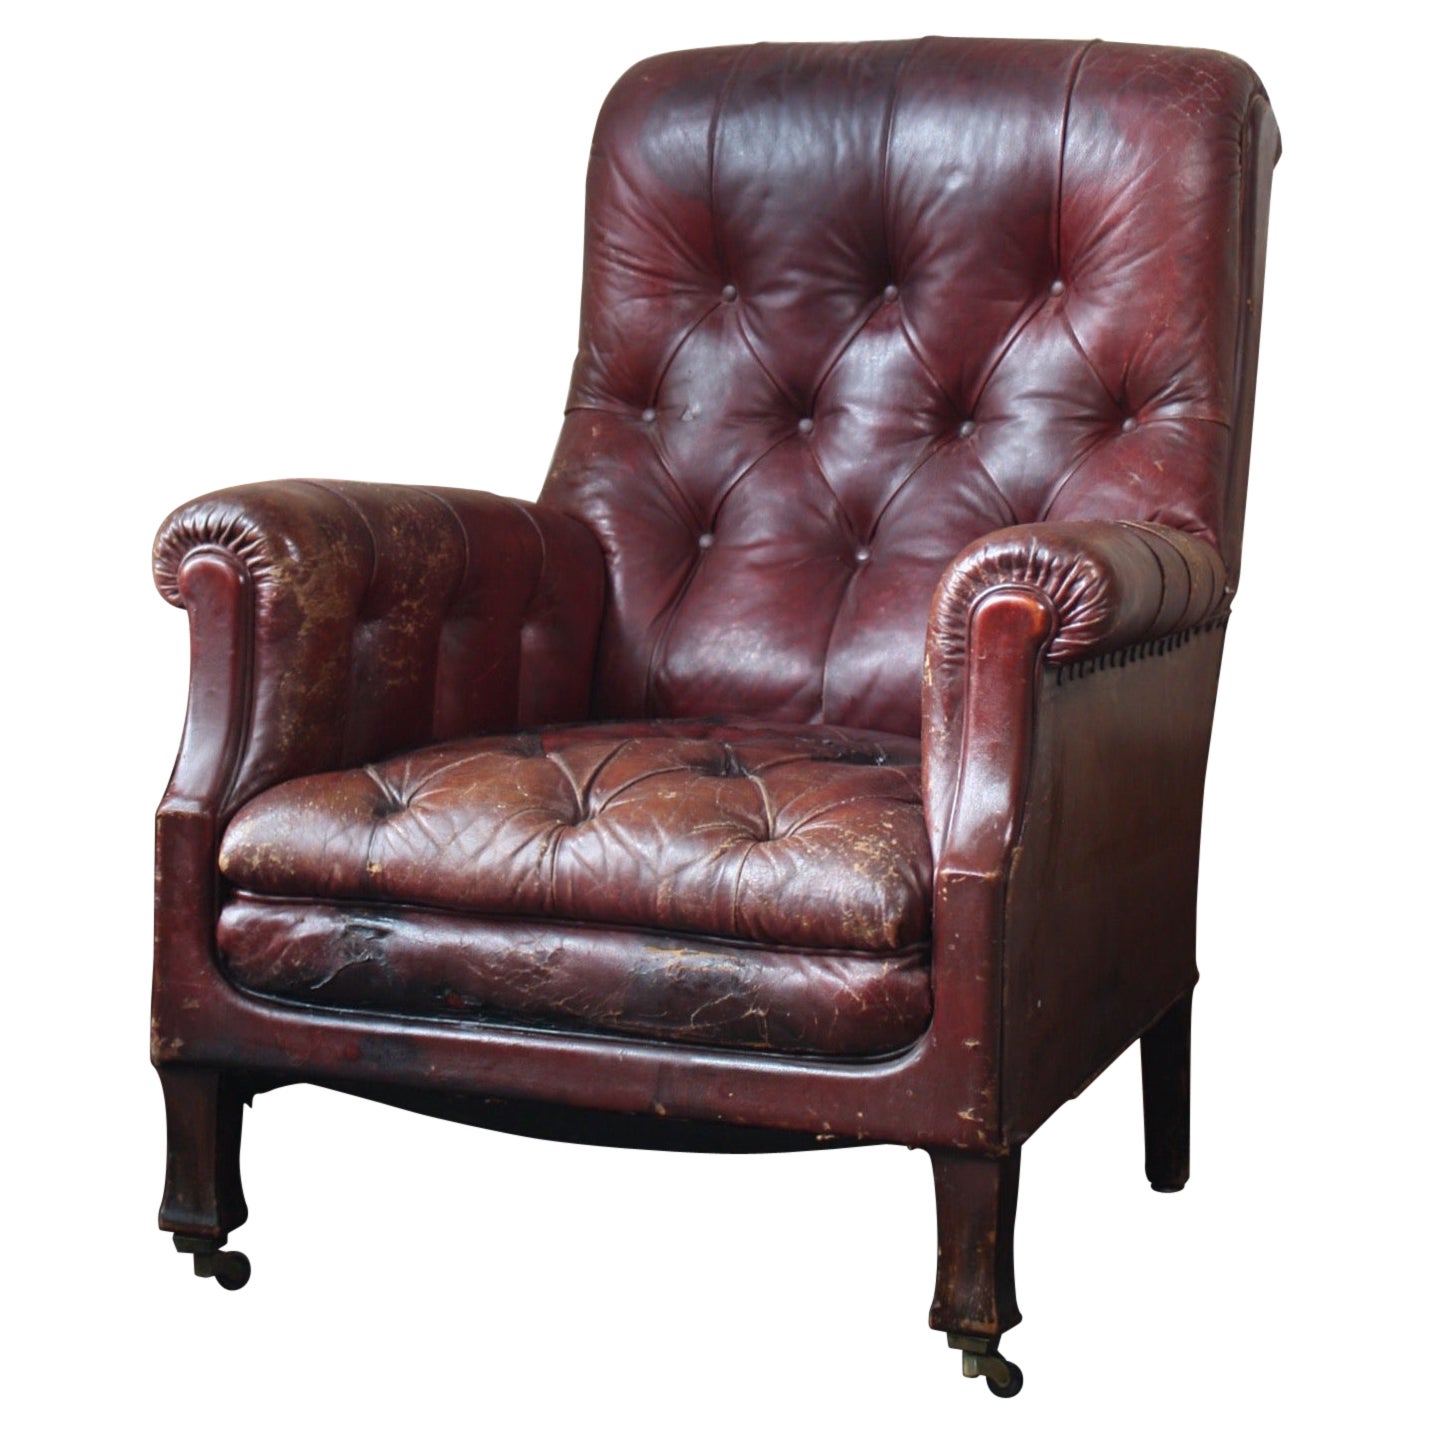 Early 20th C English Country House Style Red Maroon Leather Buttoned Armchair For Sale